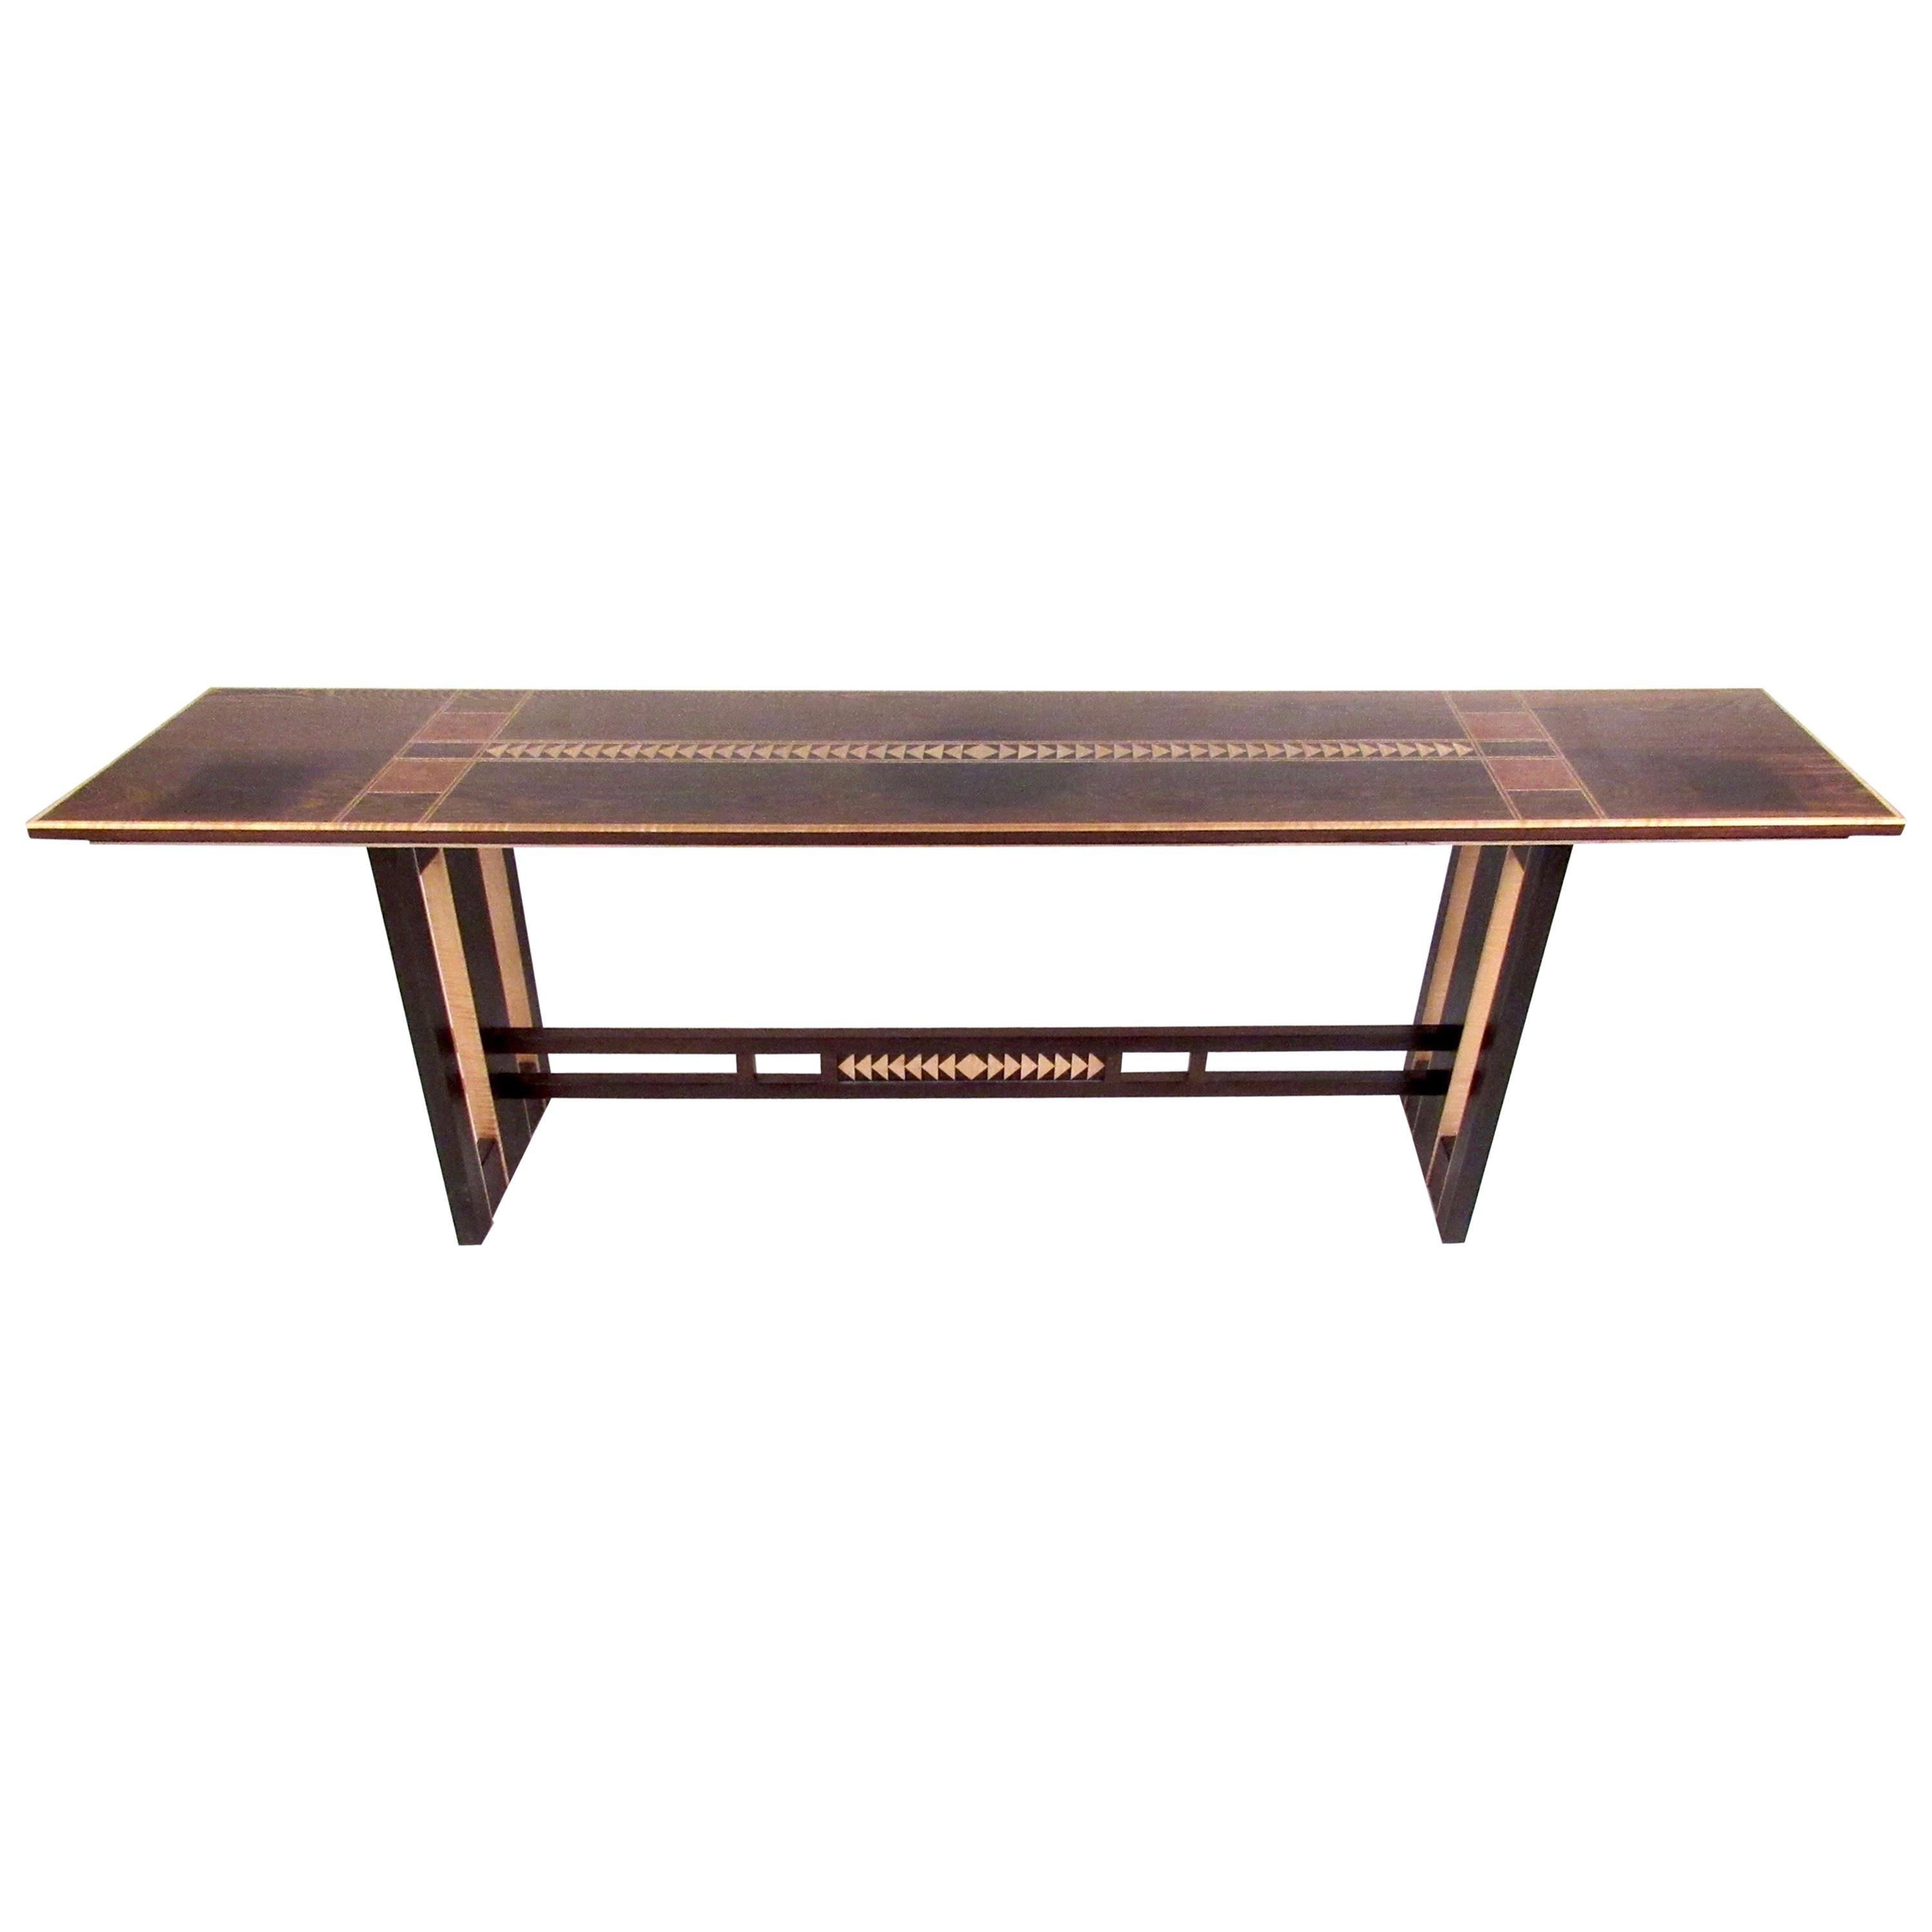 This stunning artist made console table features impressive Nakashima style trestle base and rich natural wood finish. The complimentary wood tones and detailed artistic inlays make this an impressive console or hall table for home or business.